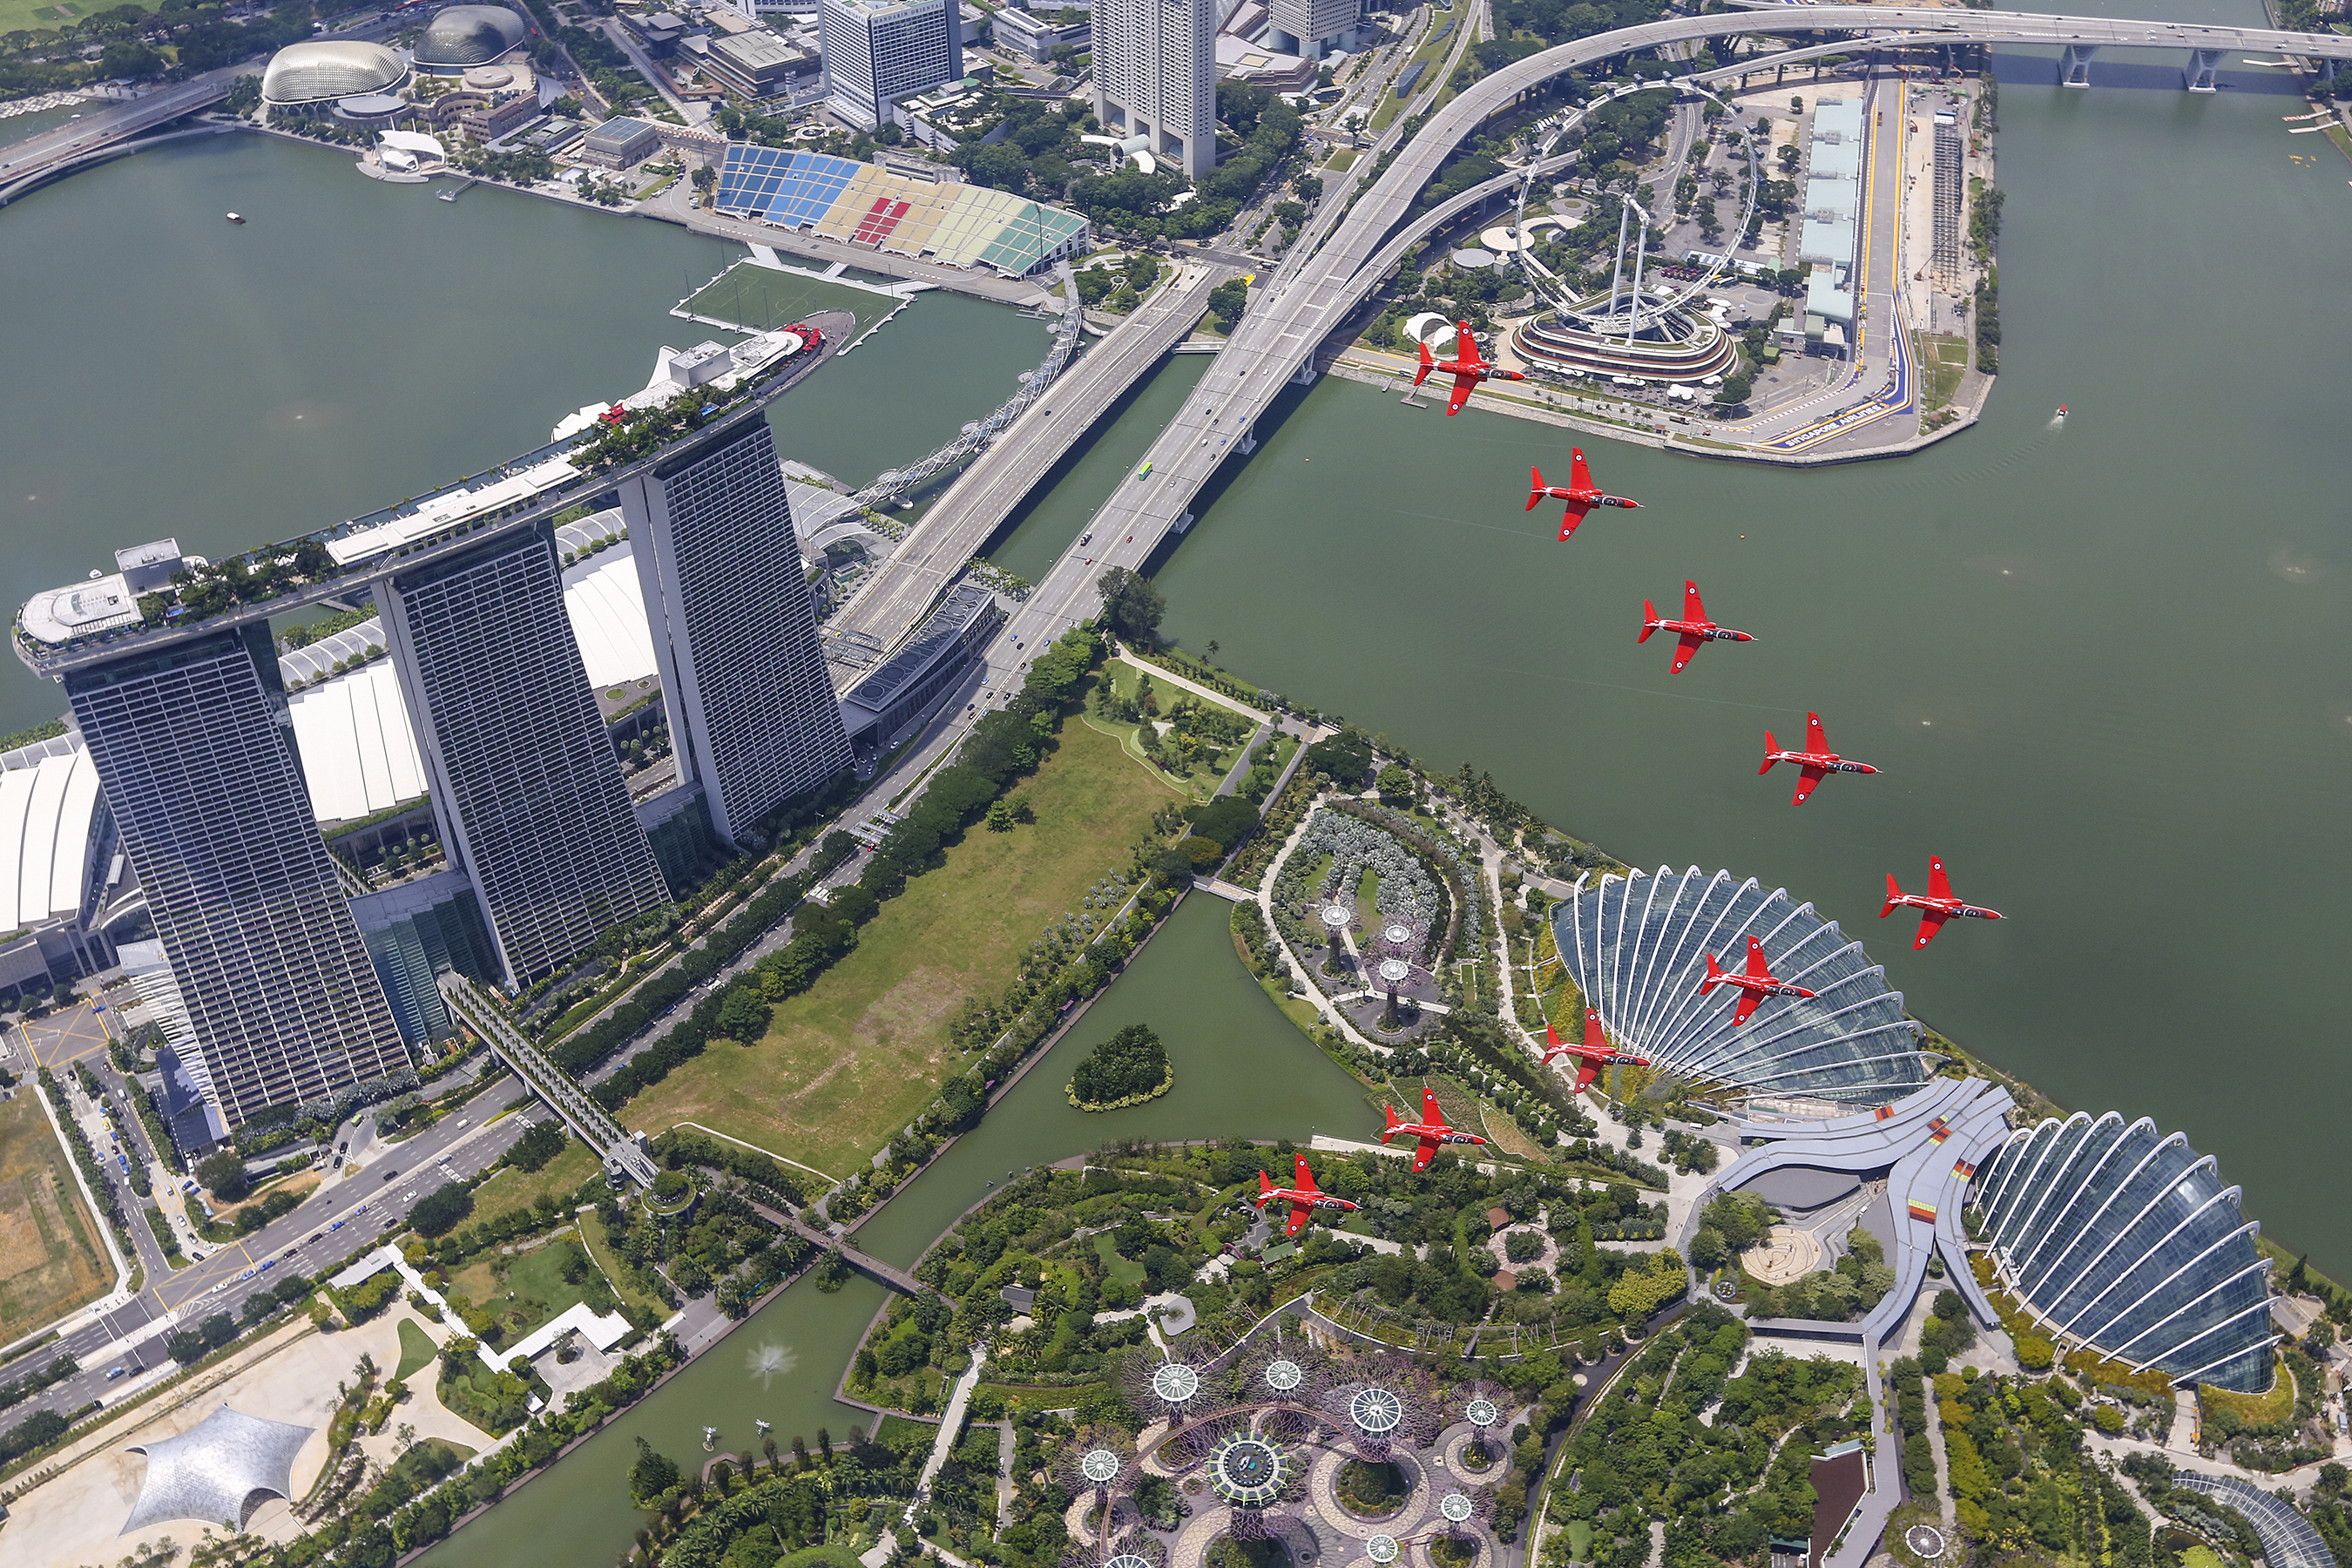 18 Oct 2016 RAF Red Arrows perform flypast over Singapore Jets from the Royal Air Force Aerobatic Team, the Red Arrows, carried out a spectacular flypast over Singapore toady (October 18). The Red Arrows flew over a stunning backdrop in the Lion City, including Marina Bay Sands and Gardens by the Bay. The performance by the world-renowned display team was part of a 60-day tour of the Asia-Pacific and Middle East regions, supporting UK interests and raising awareness of British innovation, industry and engineering excellence. After the flypast, the Red Arrows British-built Hawk jets landed at Paya Lebar in Singapore, where the crews met military, business and other leaders. A few days before the flypast, a Red Arrows advance team had carried out a visit to a local university and also Rolls-Royces Seletar Campus, to promote the importance of the so-called STEM subjects of science, technology, engineering and maths. Squadron Leader David Montenegro, Team Leader of the Red Arrows and who leads the nine-jet formation as Red 1, said: The Red Arrows are thrilled to be able to perform in such a vibrant location as Singapore and are grateful for the support provided by the authorities and Republic of Singapore Air Force to make it possible. The flypast was a unique, high-profile and tangible way of demonstrating the UKs long-standing relationship with Singapore. Were delighted to be able to support British industries and businesses in such an exciting way in Singapore and the event illustrates how Britain is global, working with partners across the world. Together with the associated ground activities during our visit  highlighting engineering and aerospace excellence  I hope we have also inspired young people to study the important STEM subjects.      This image shows the Royal Air Force Aerobatic Team The Red Arrows arriving in Singapore with a flypast over the marina area. Also in the shot is the Marina Bay Sands Hotel. Th